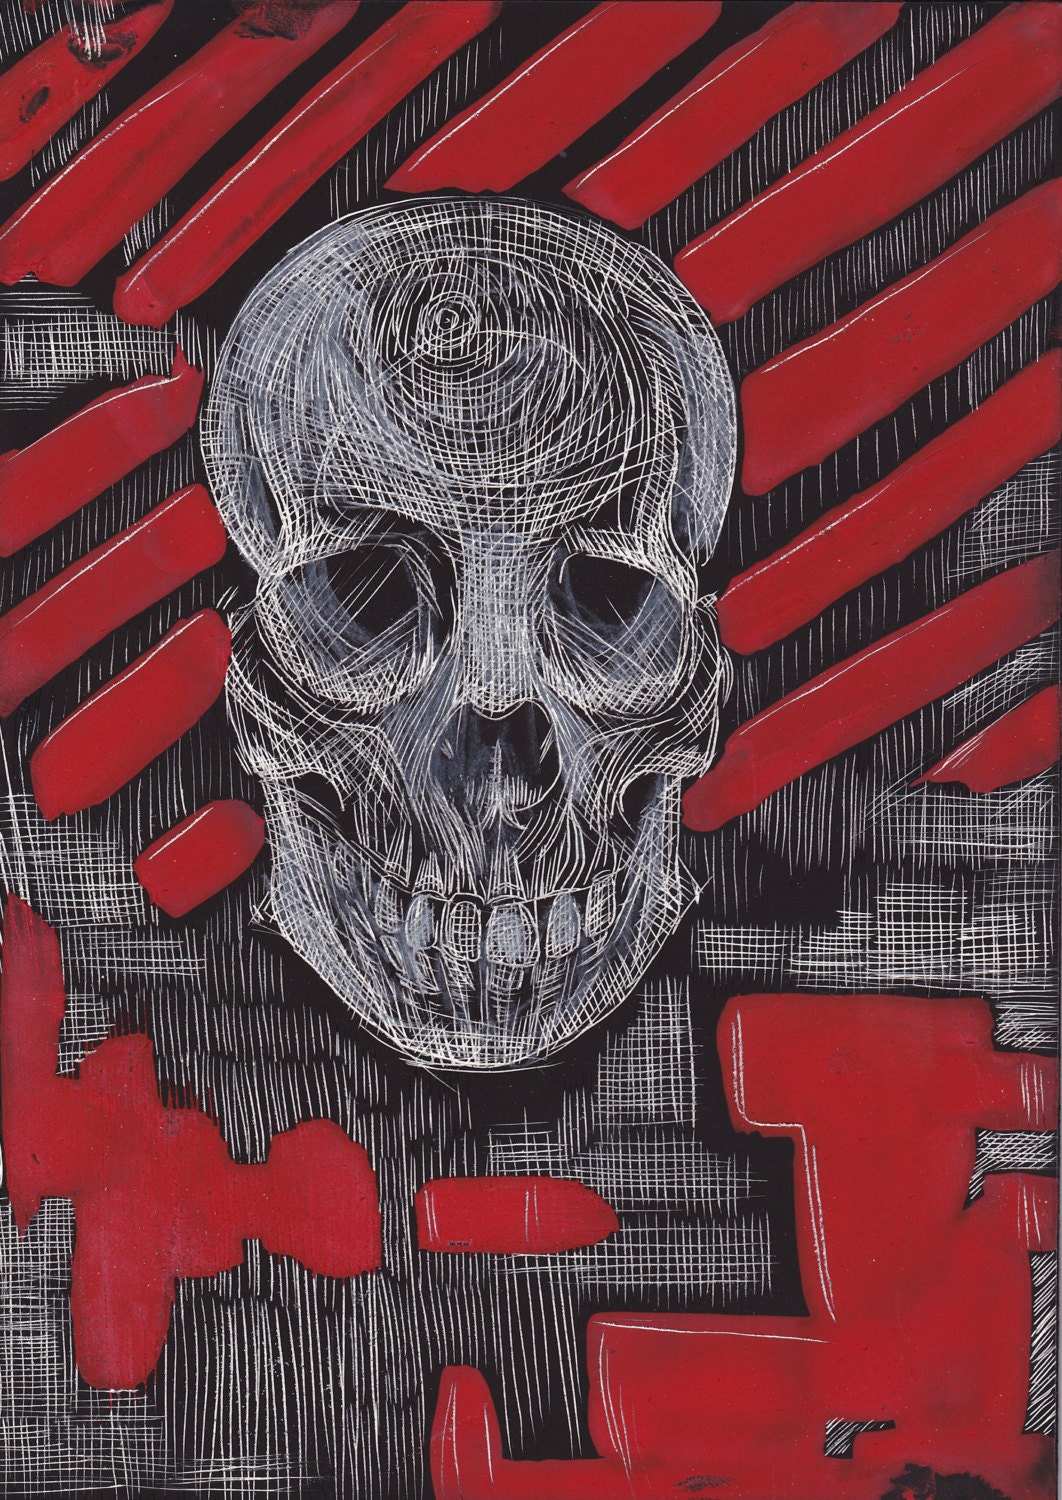 Skull & Red Stripes - Reproduction - AtomicAurora